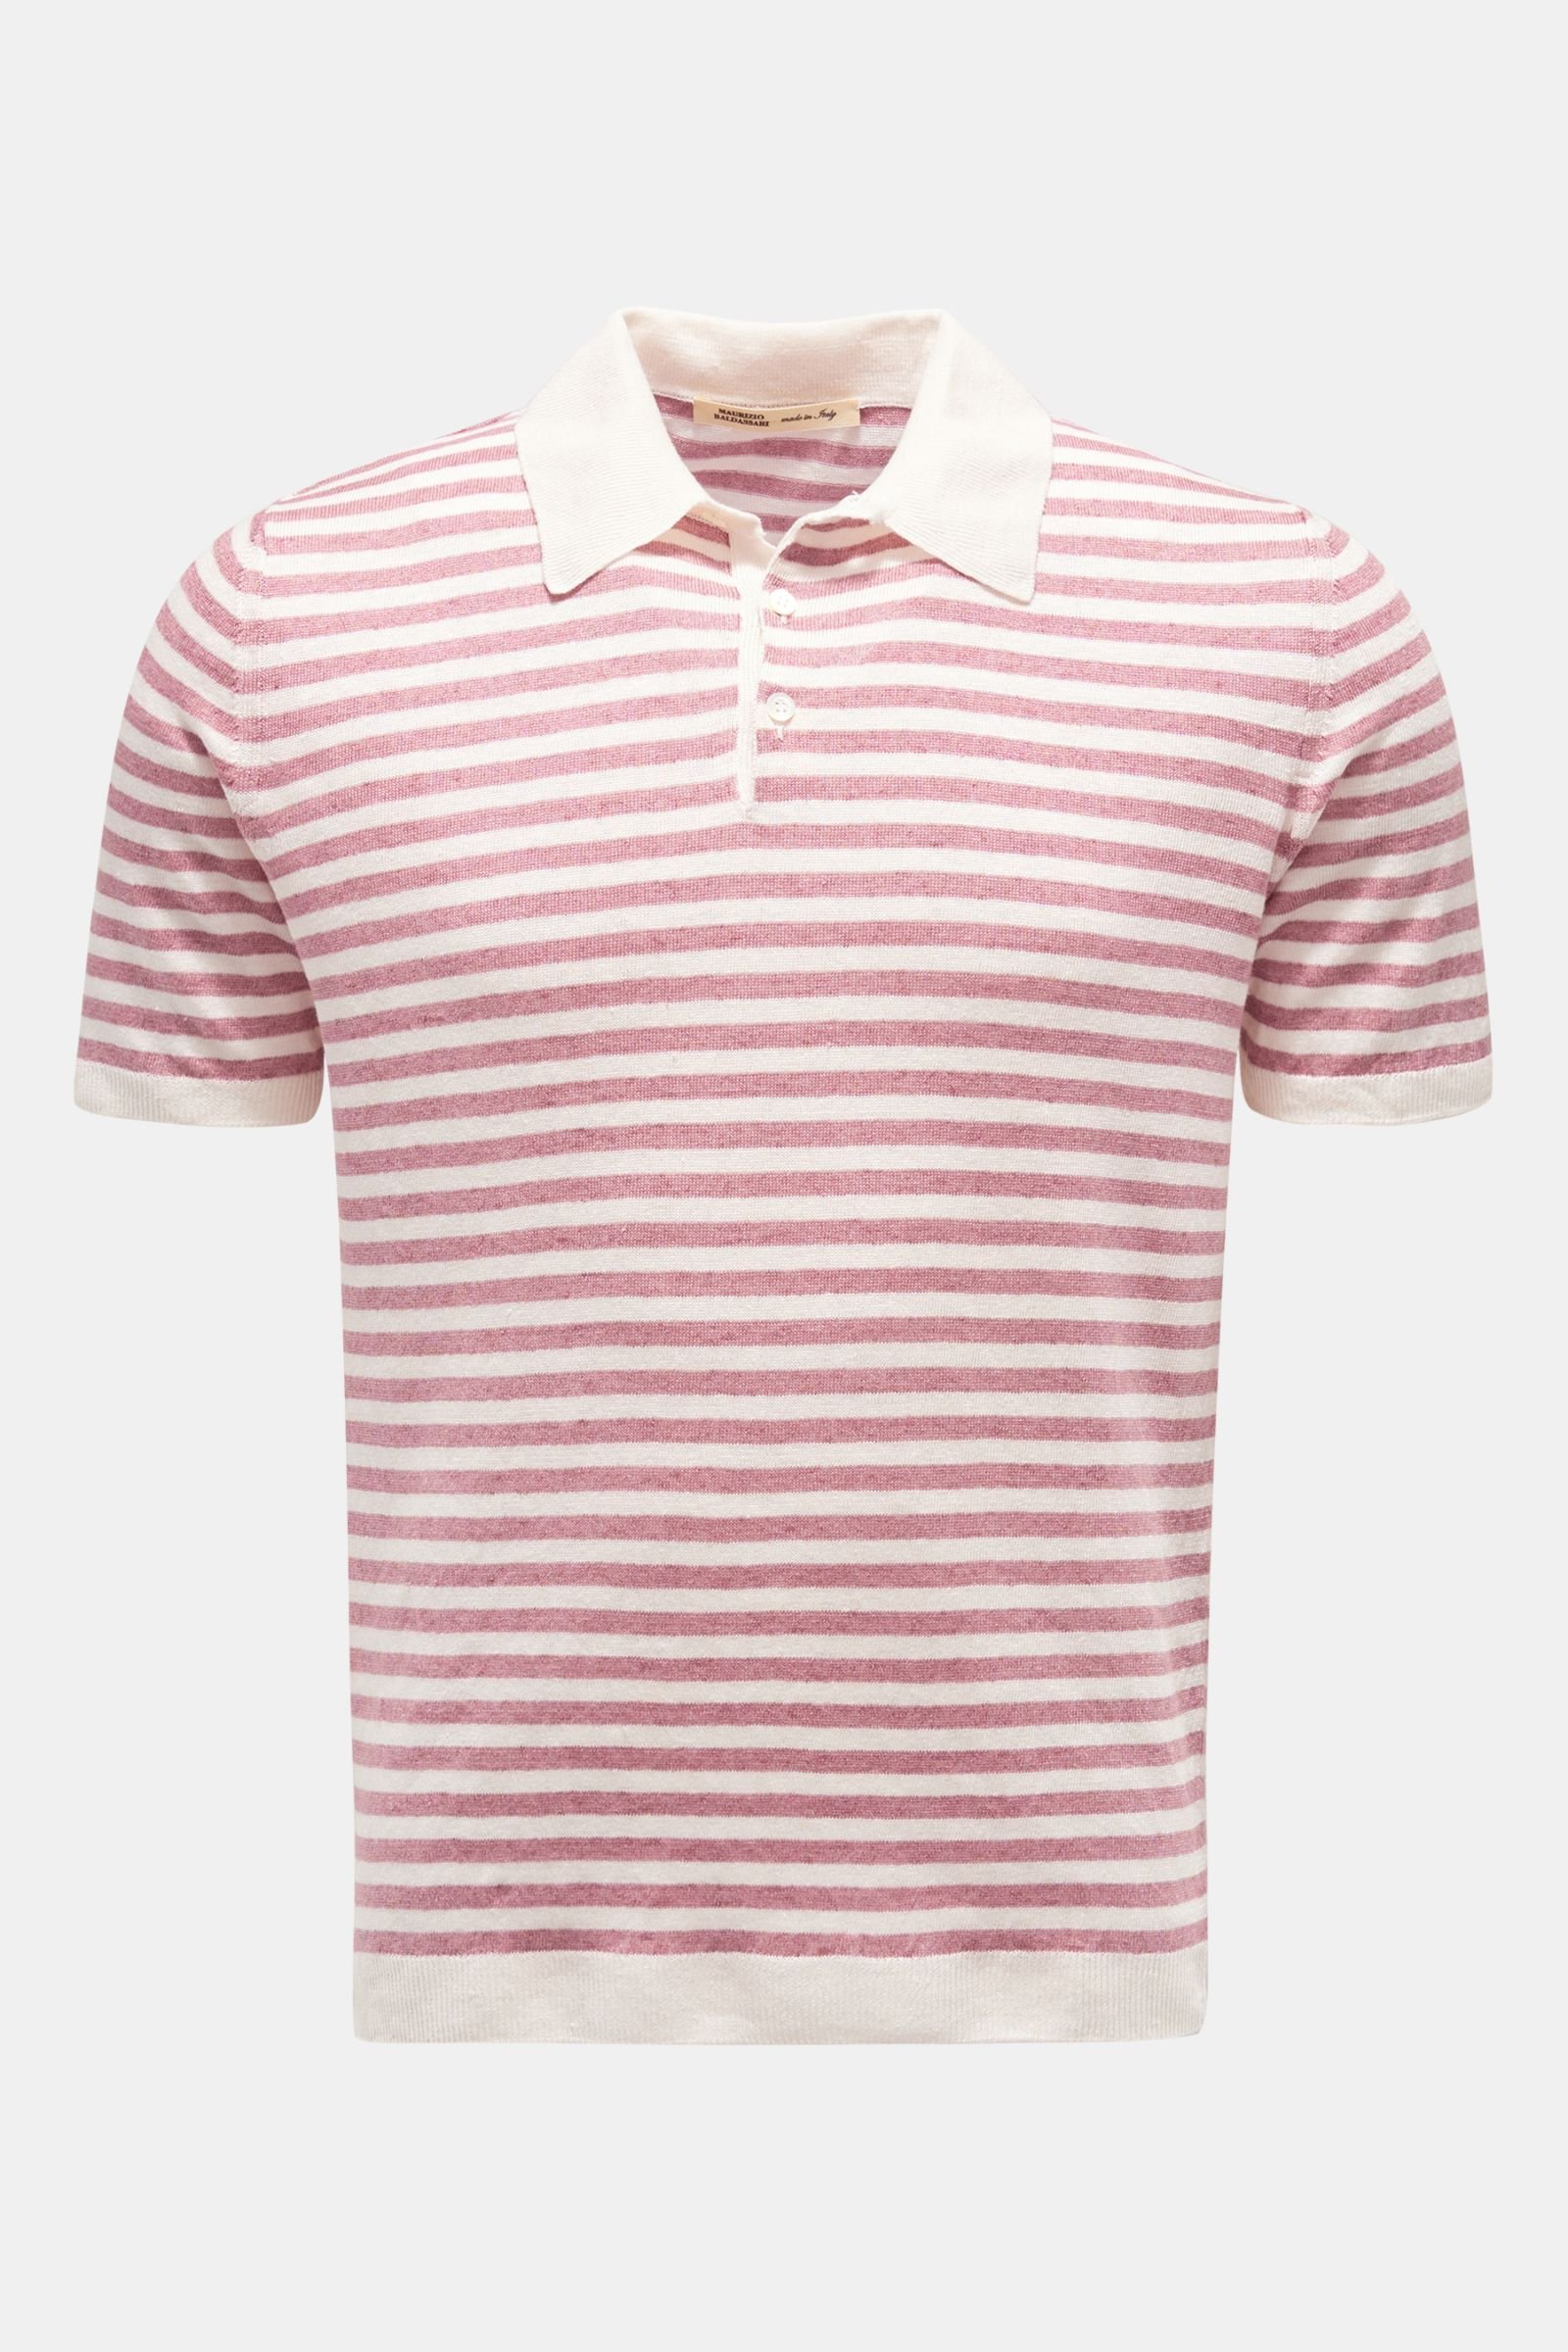 Linen short-sleeved knit polo antique rose/cream striped